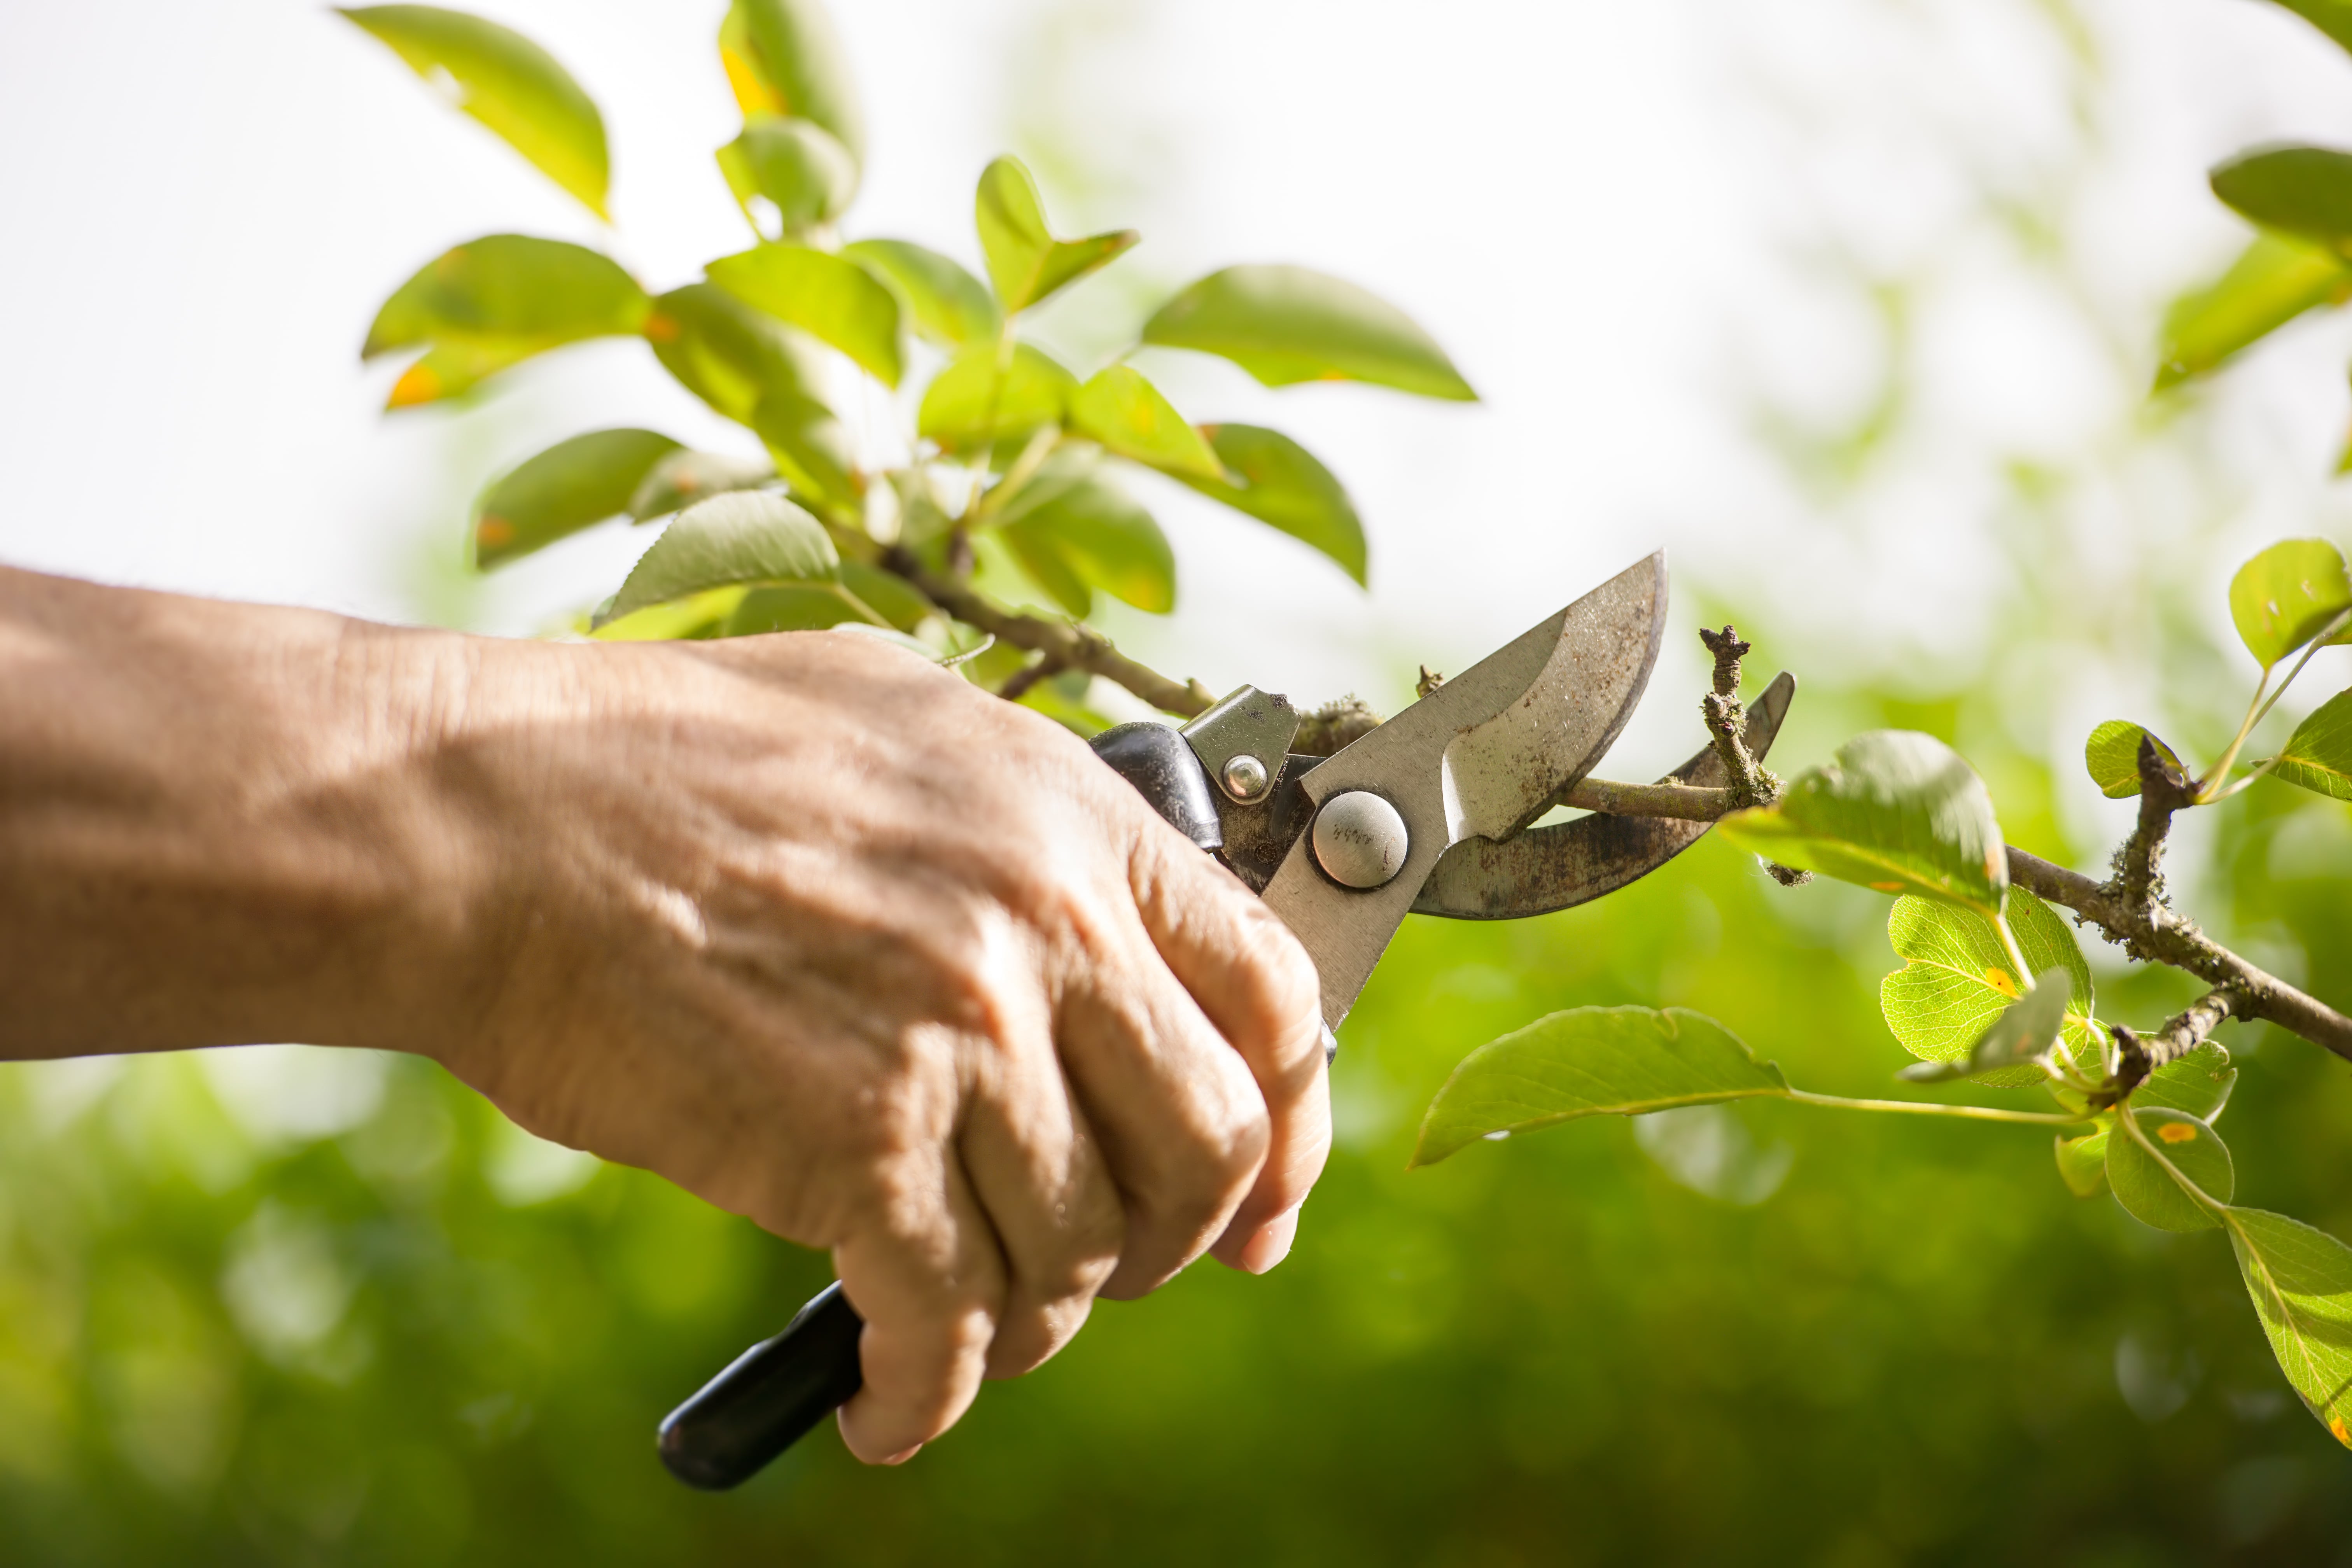 Guide to early spring pruning